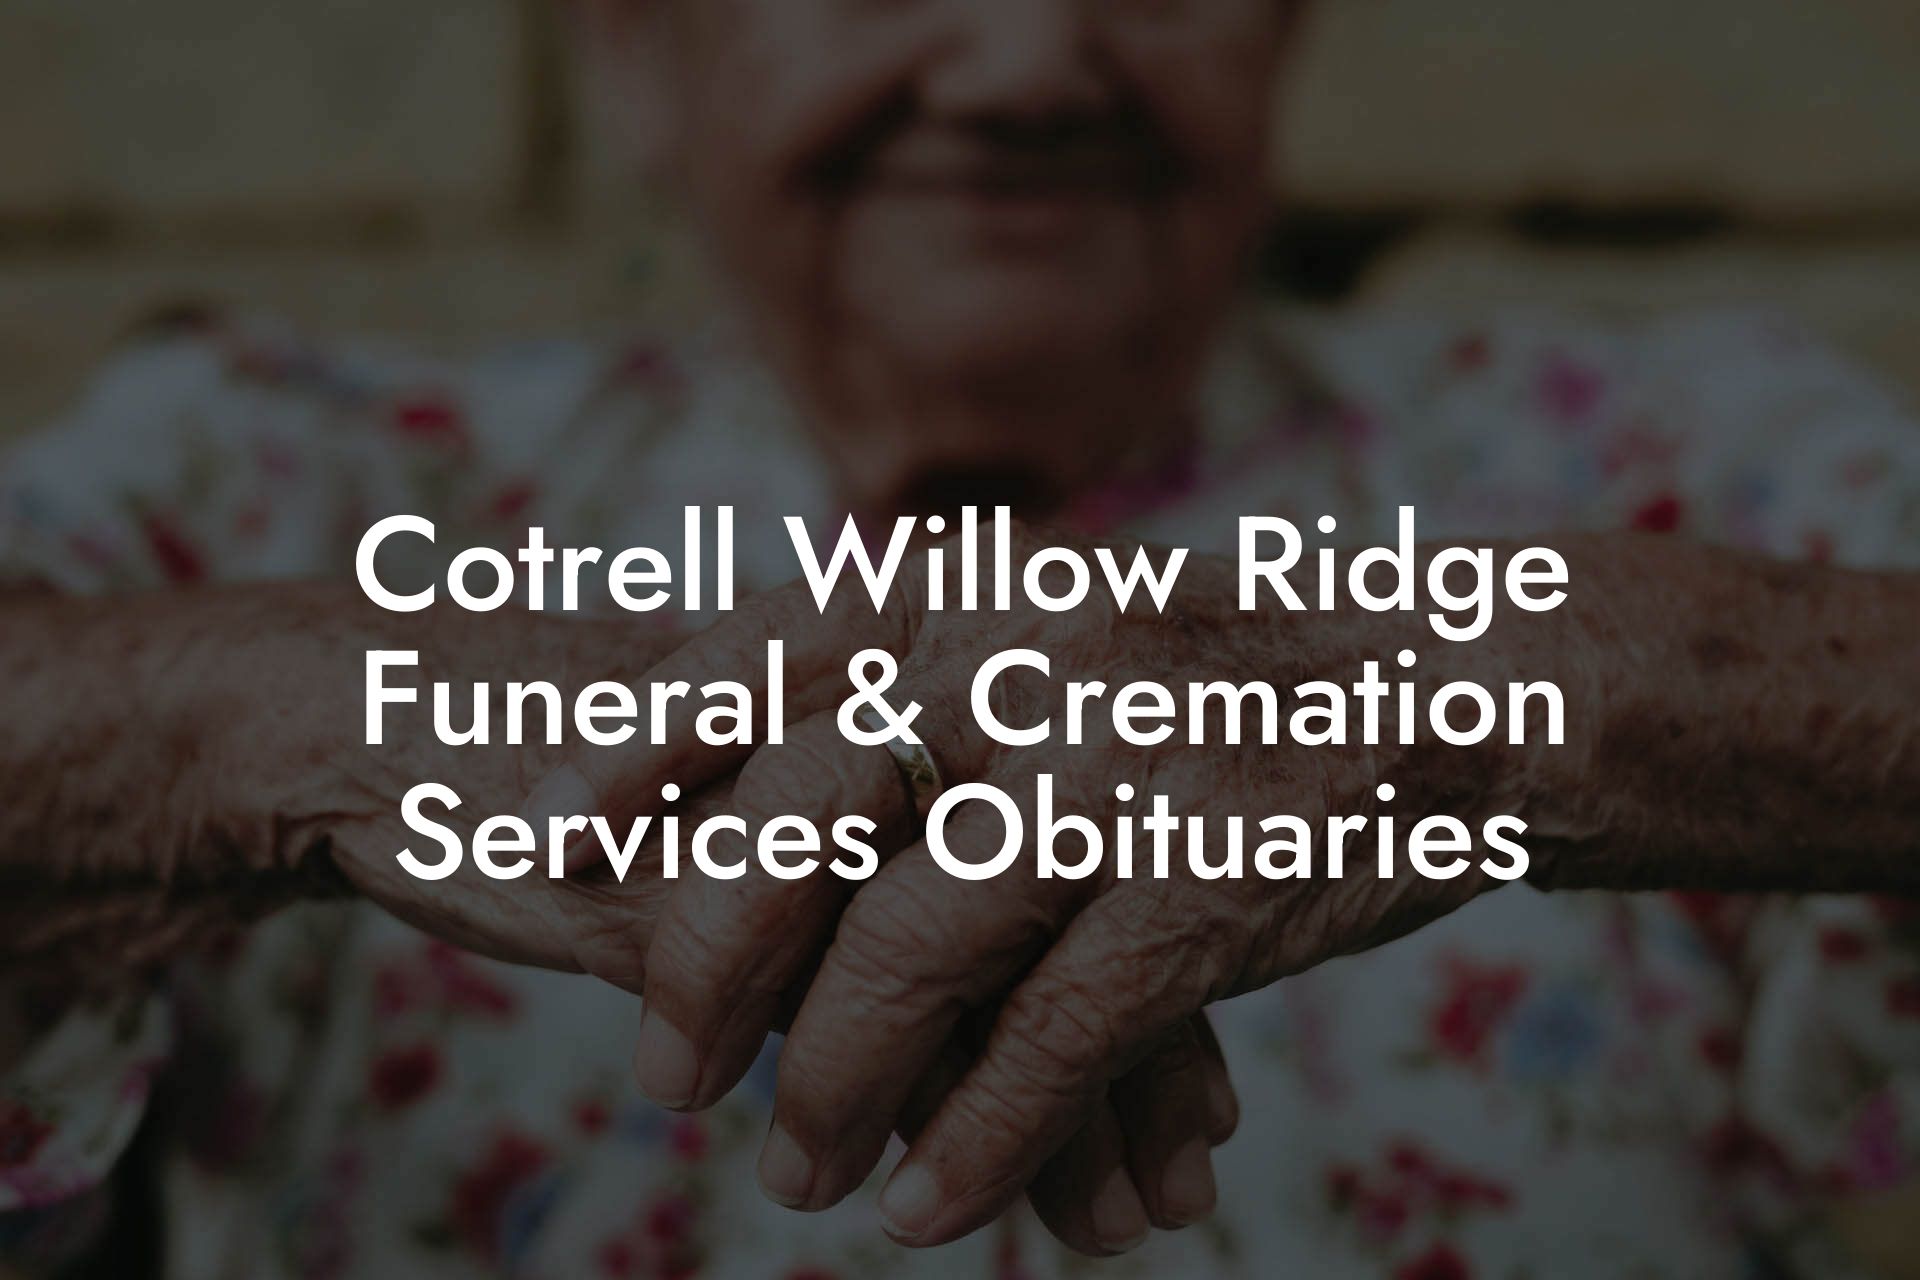 Cotrell Willow Ridge Funeral & Cremation Services Obituaries